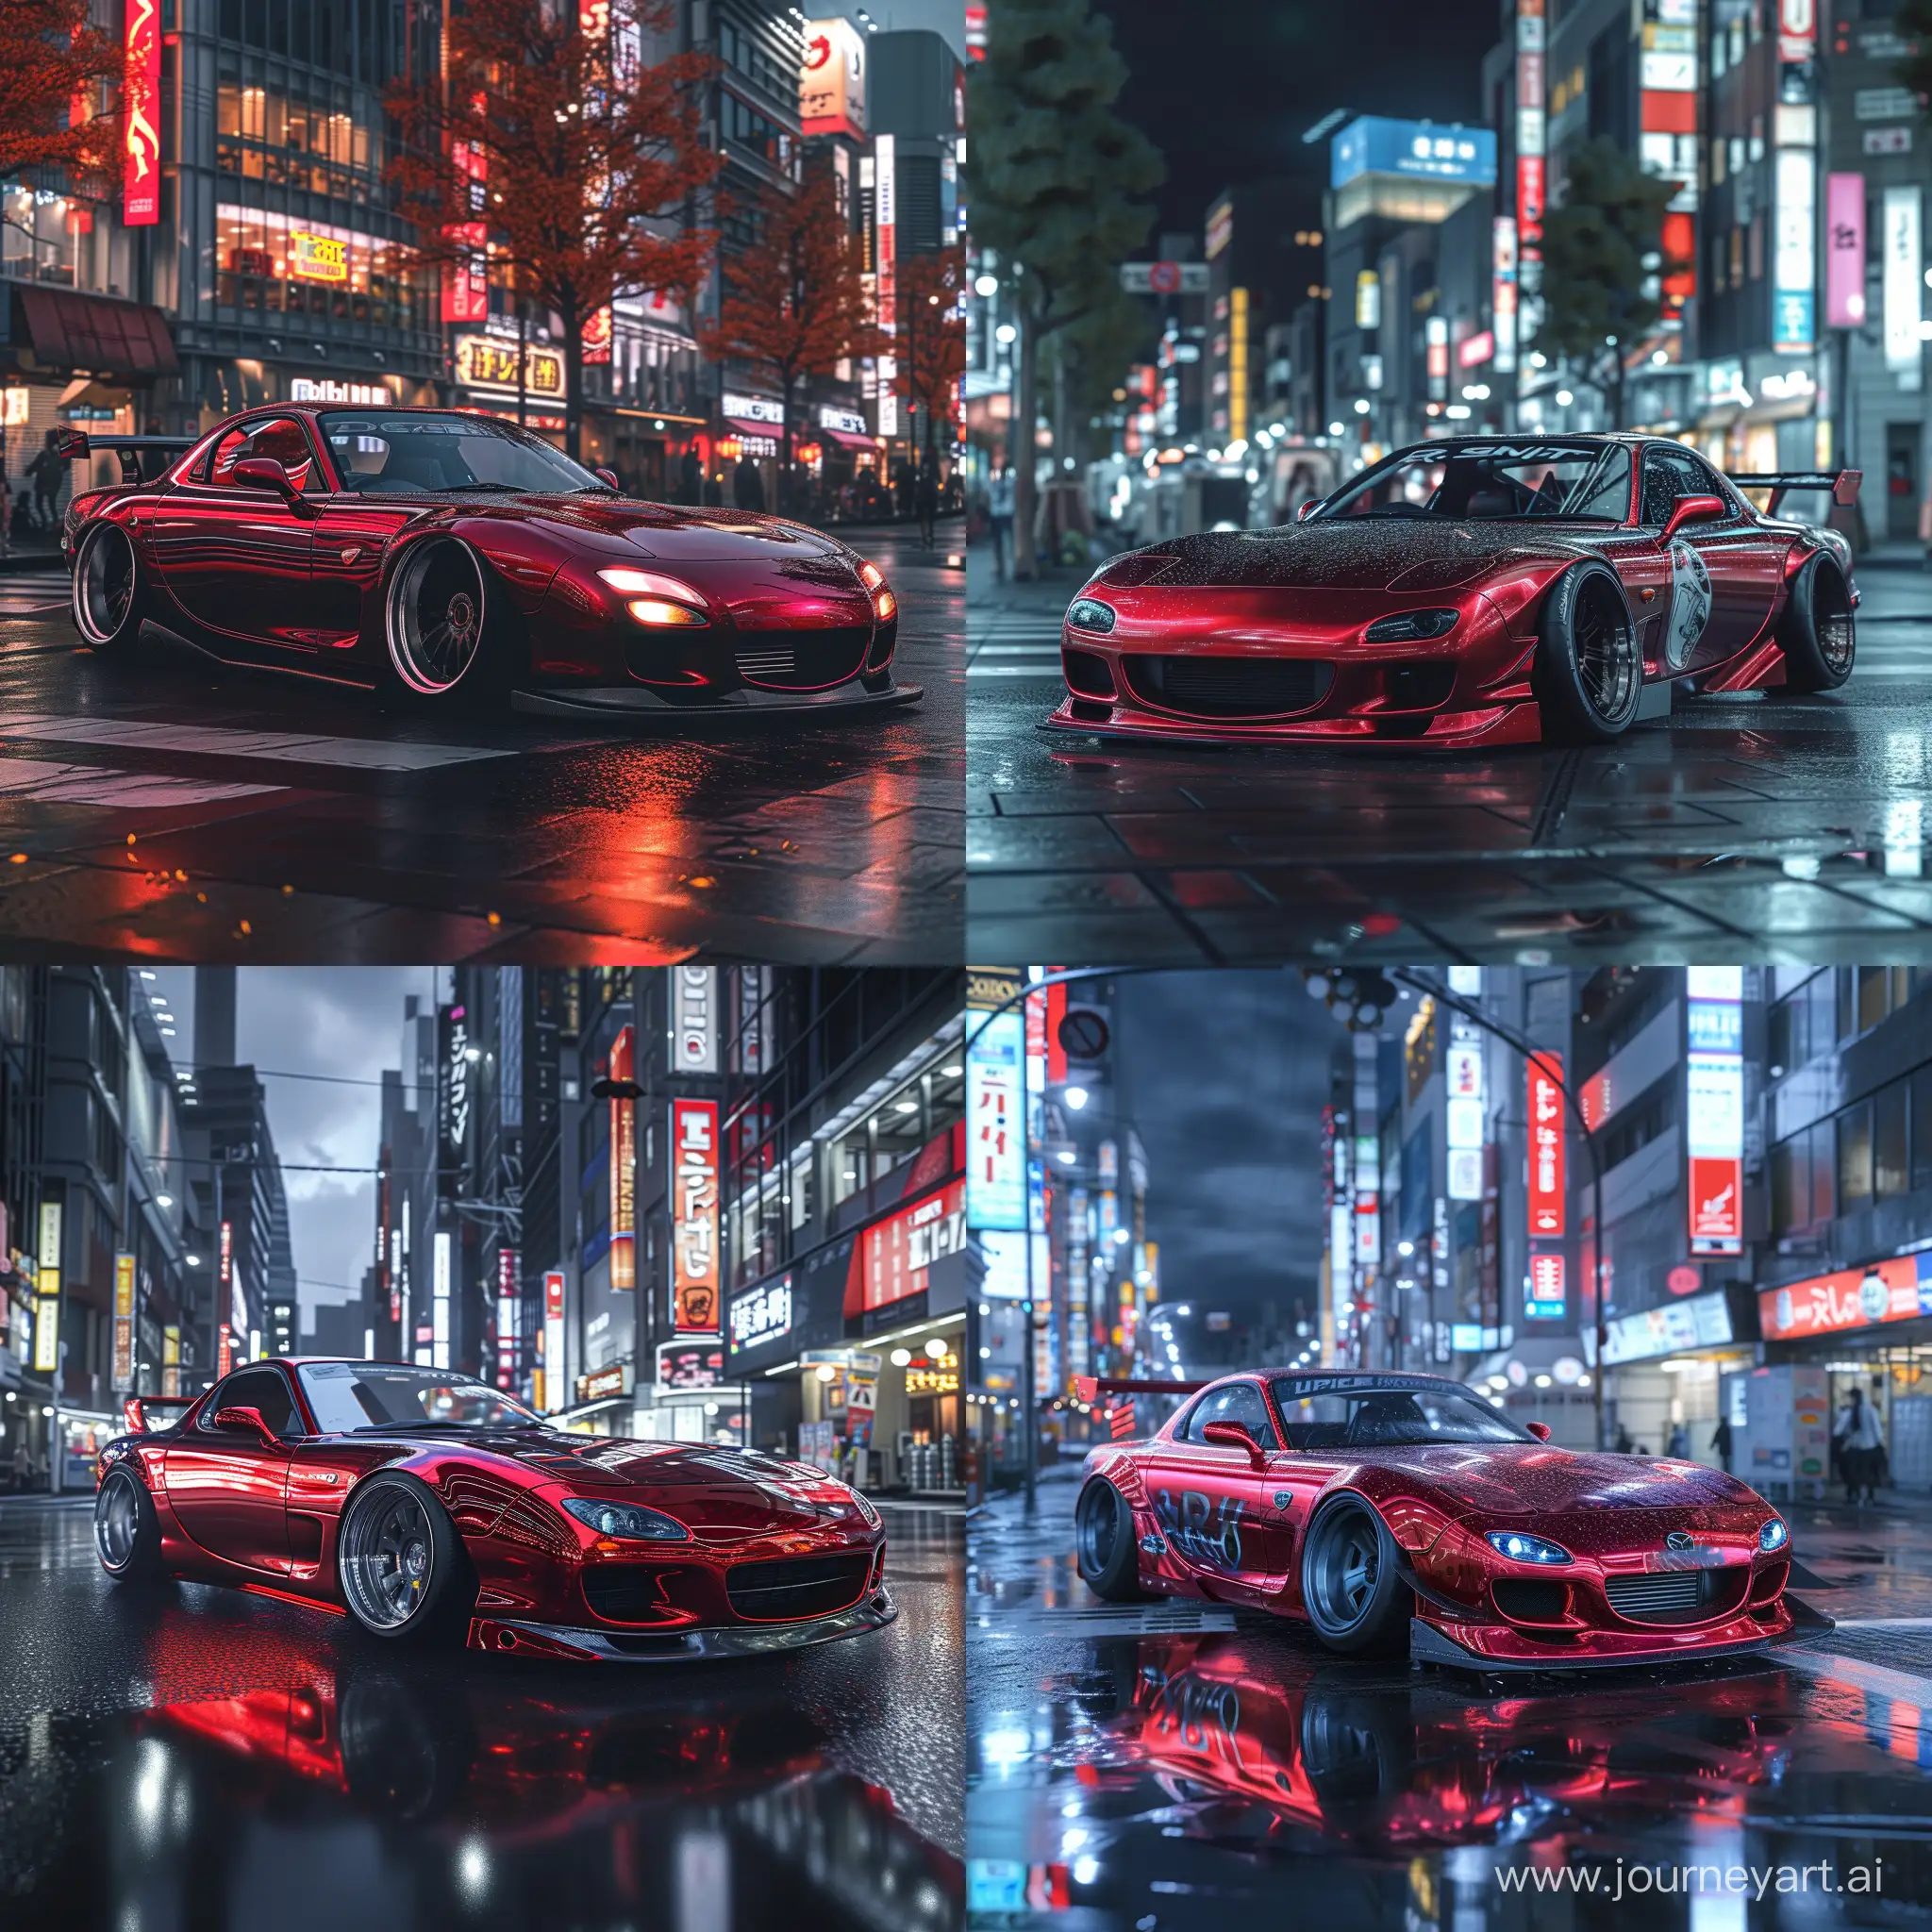 Hyperrealistic-Tokyo-Drift-Red-Metallic-Mazda-Rx7-in-Action